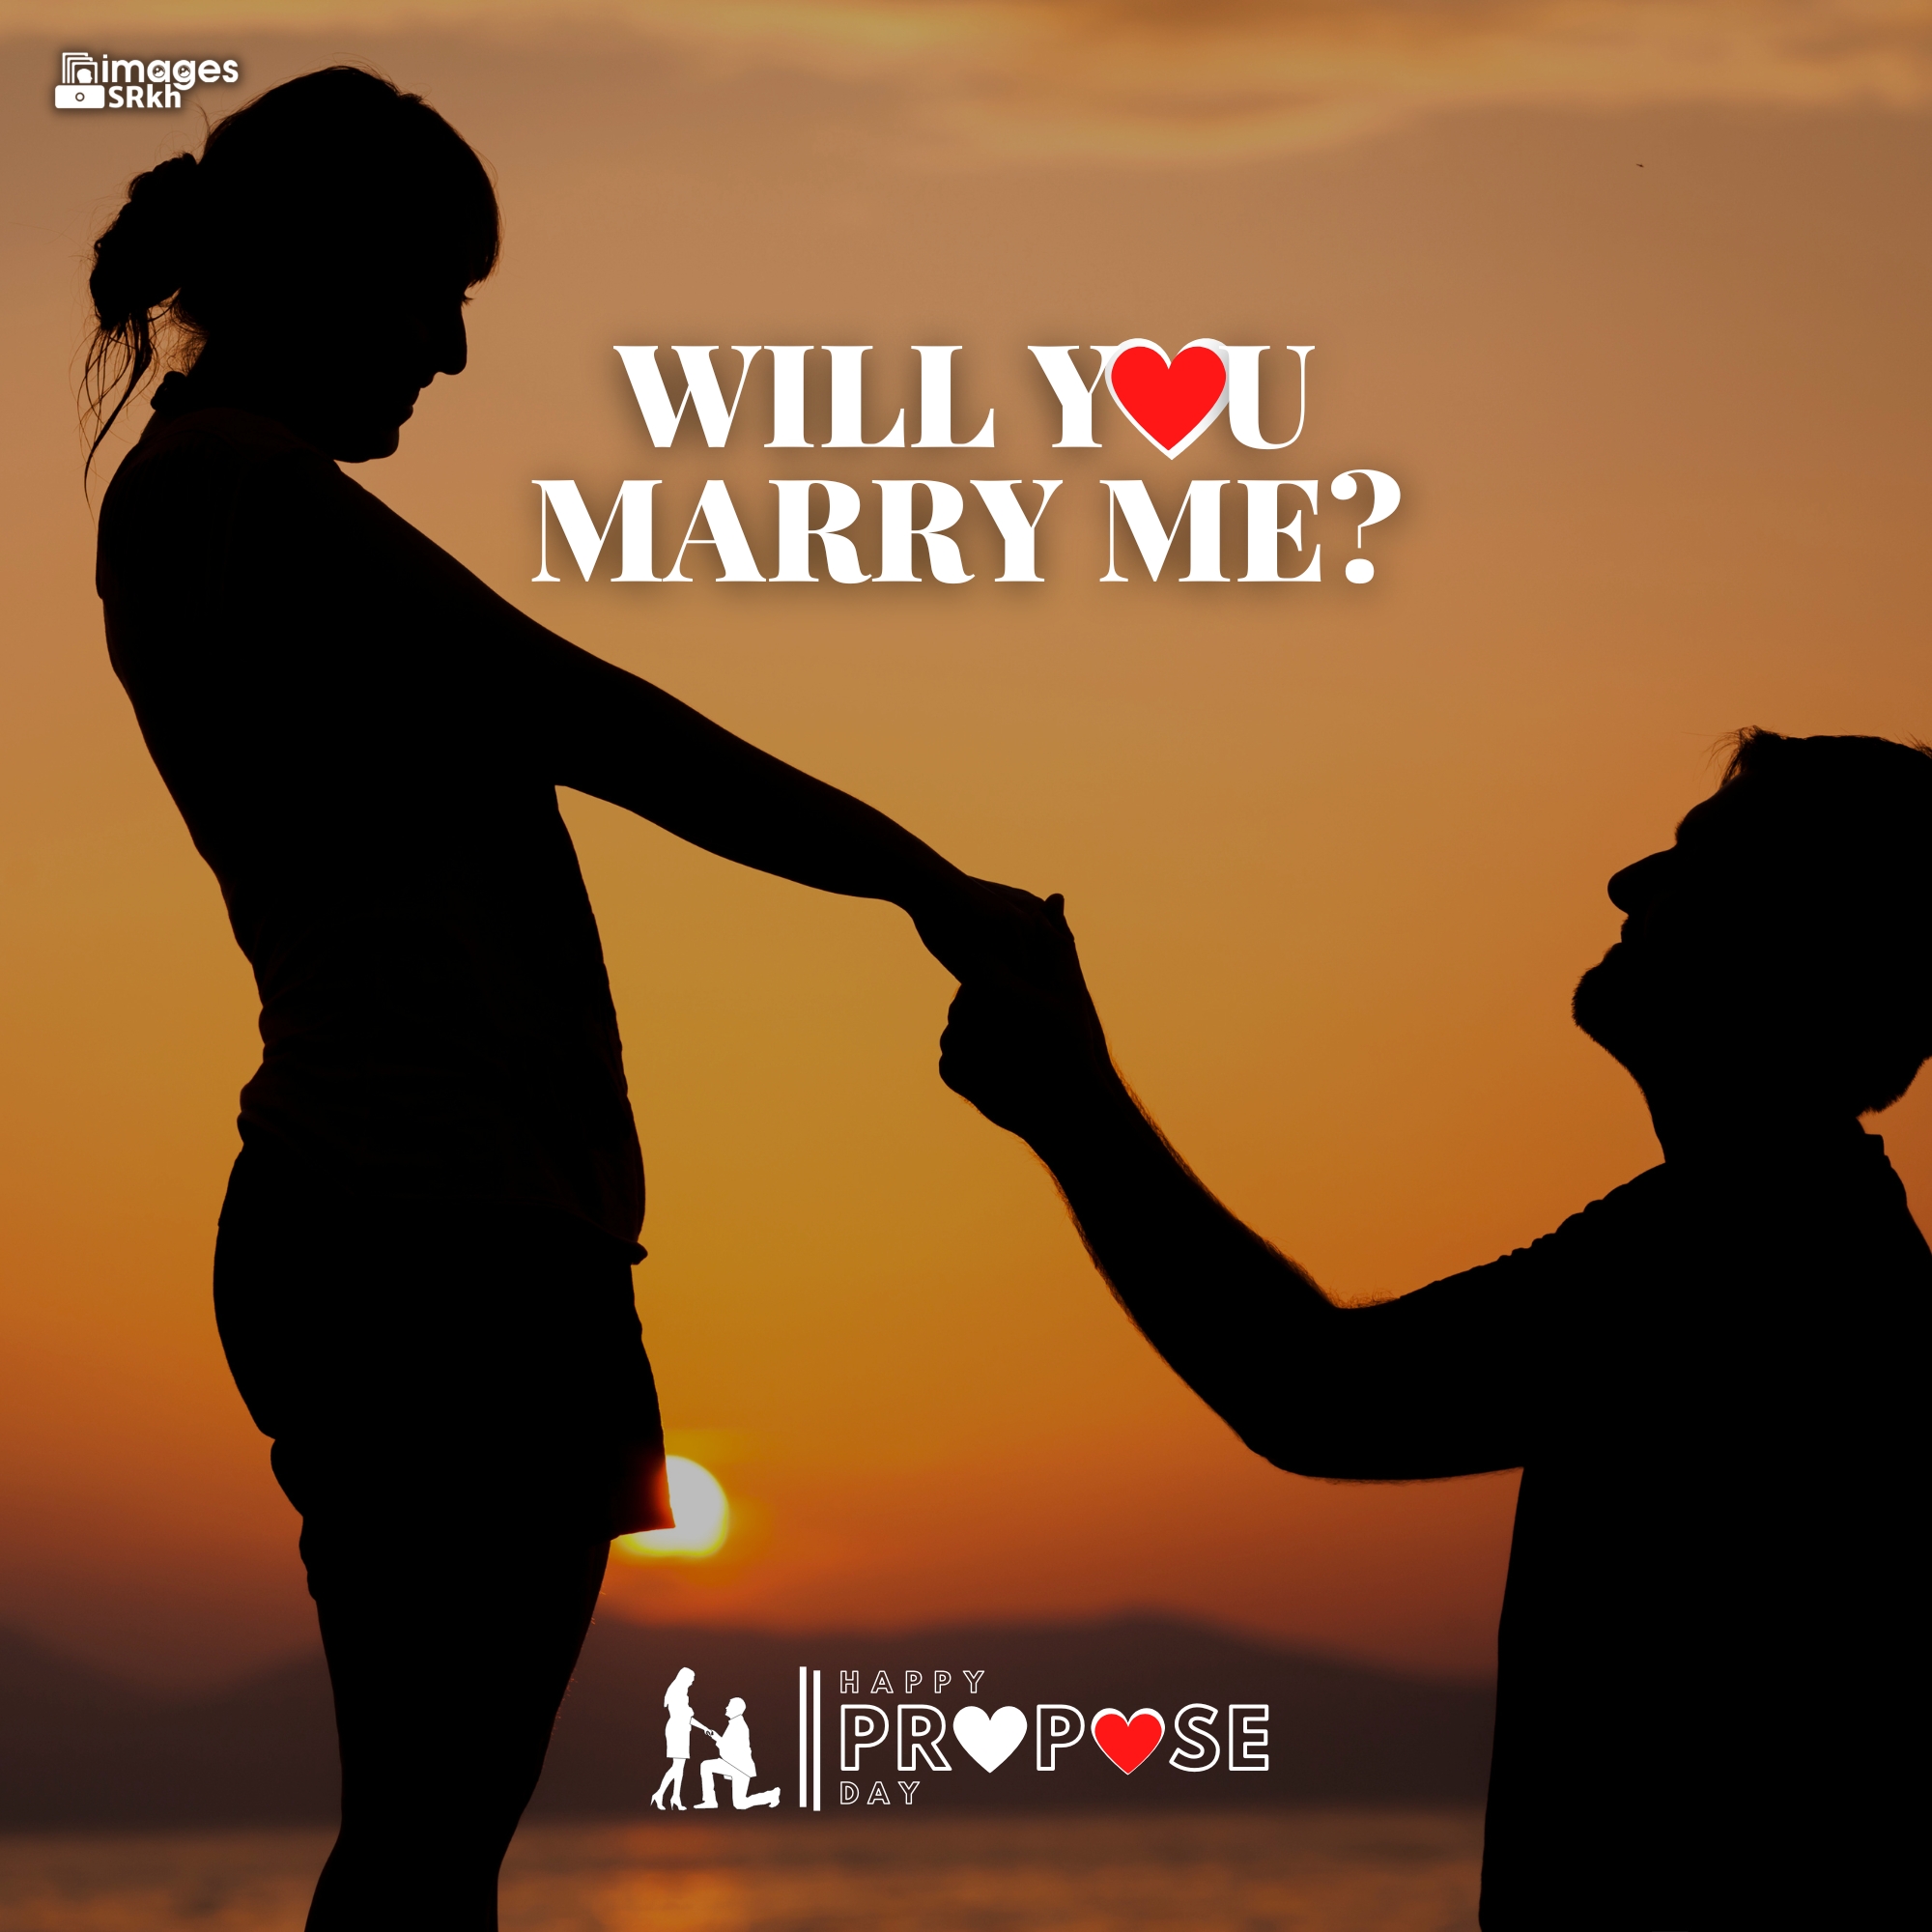 Propose Day Images | 283 | Will You MARRY ME